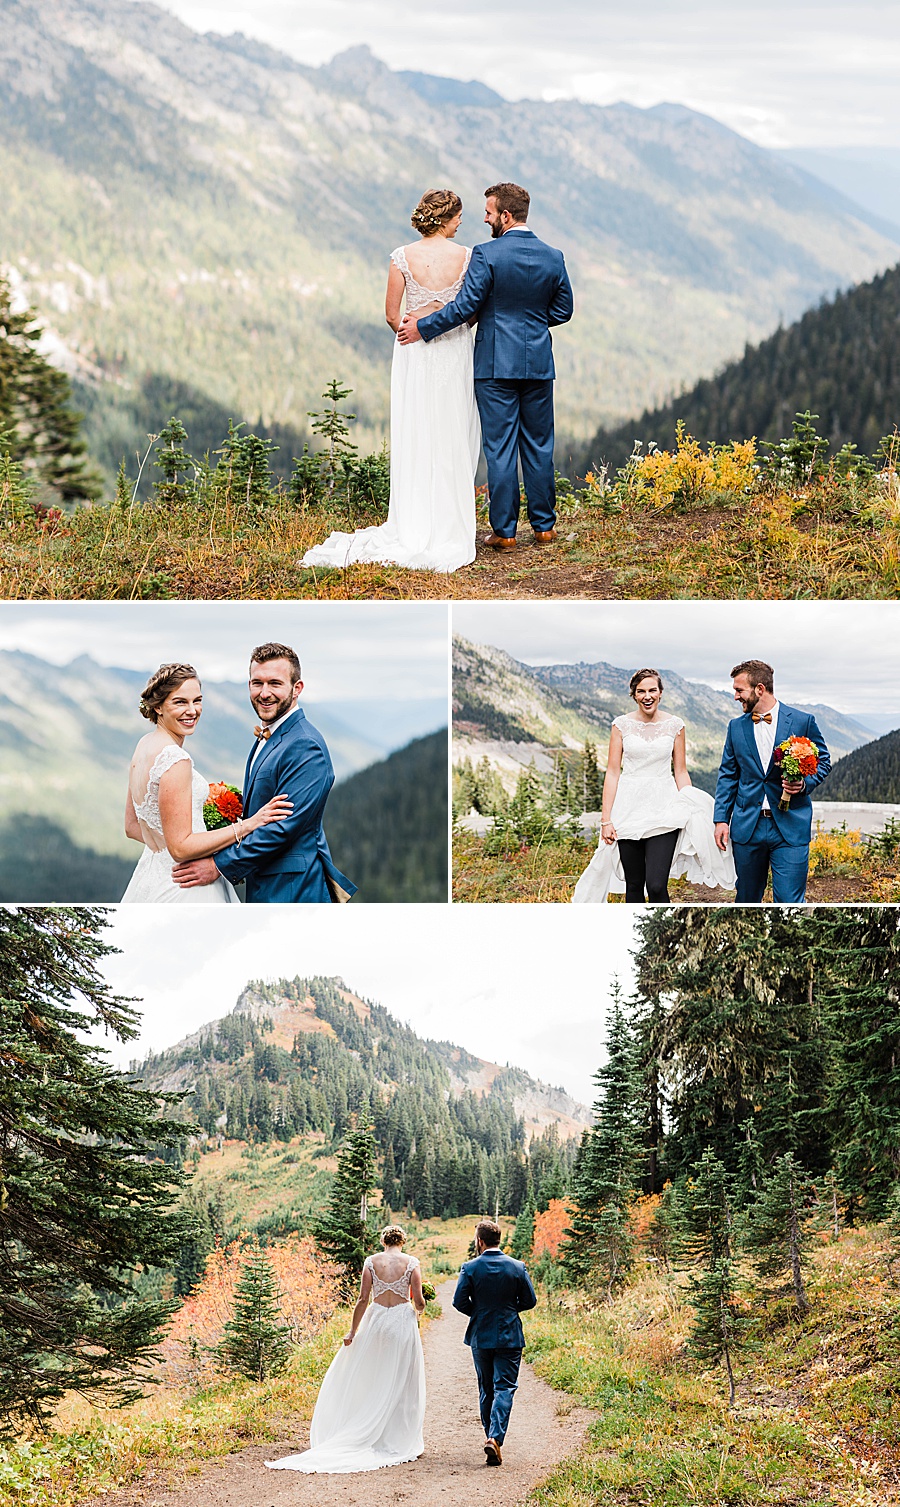 Bride and groom share sweet moments together on their wedding day in the backcountry of Washington